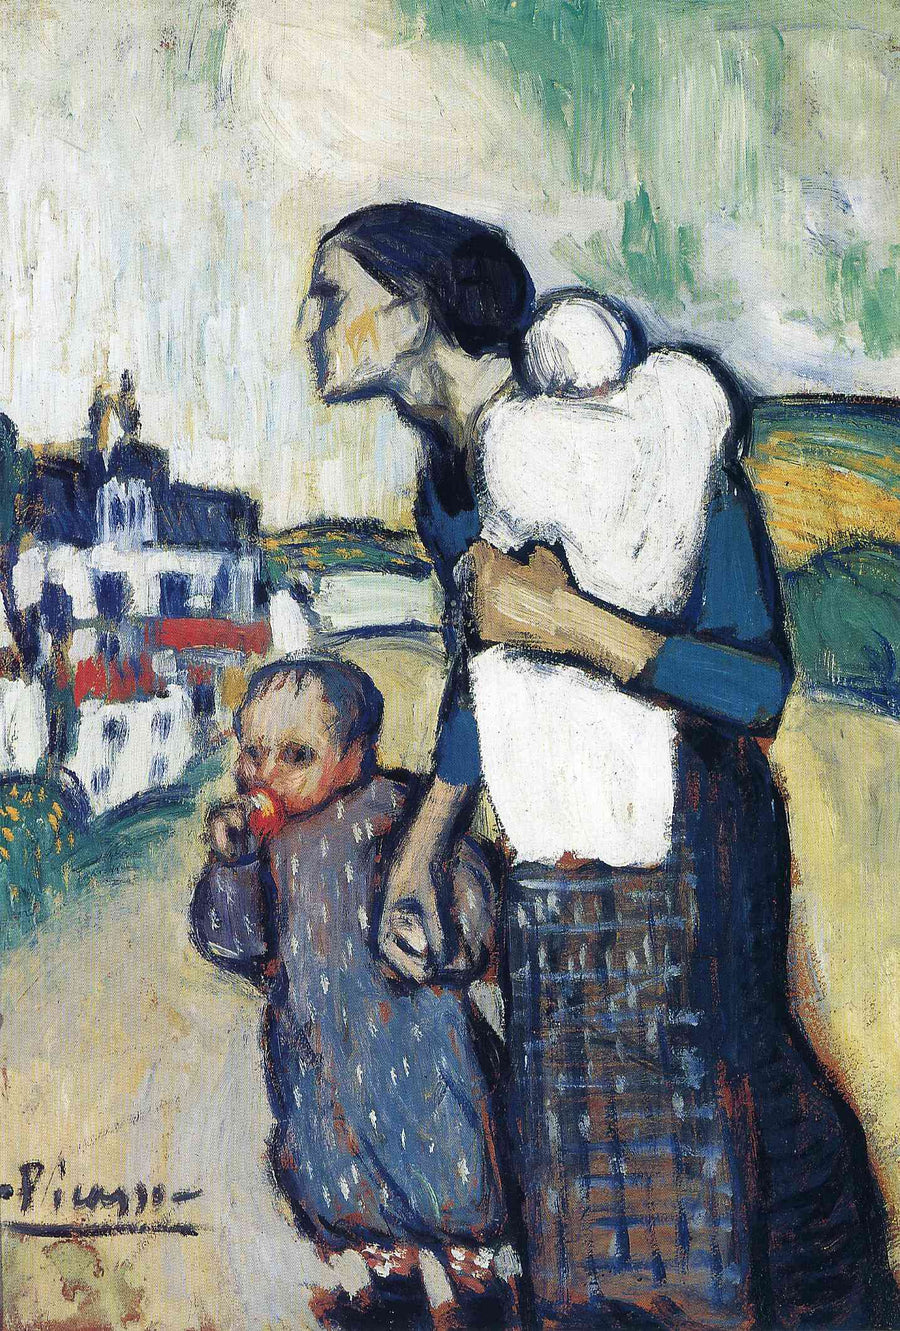 The mother leading two children by Pablo Picasso. Picasso artworks, Picasso wall art, Picasso canvas art, Picasso reproduction for sale, Picasso oil painting on canvas, Blue Surf Art